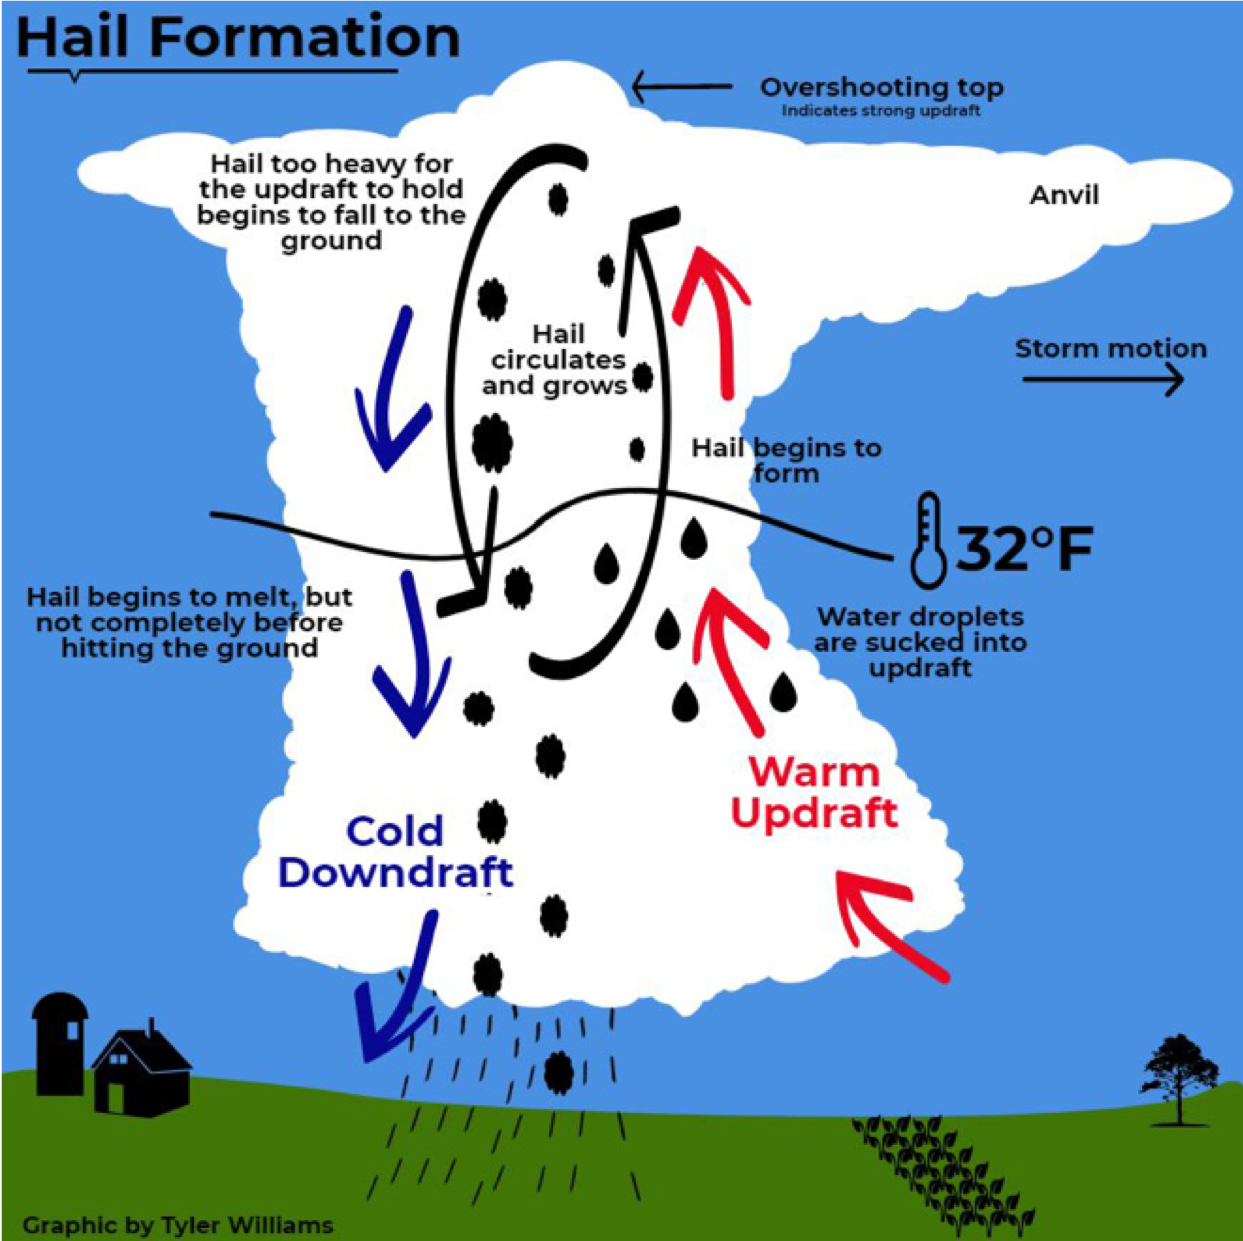 Hail formation